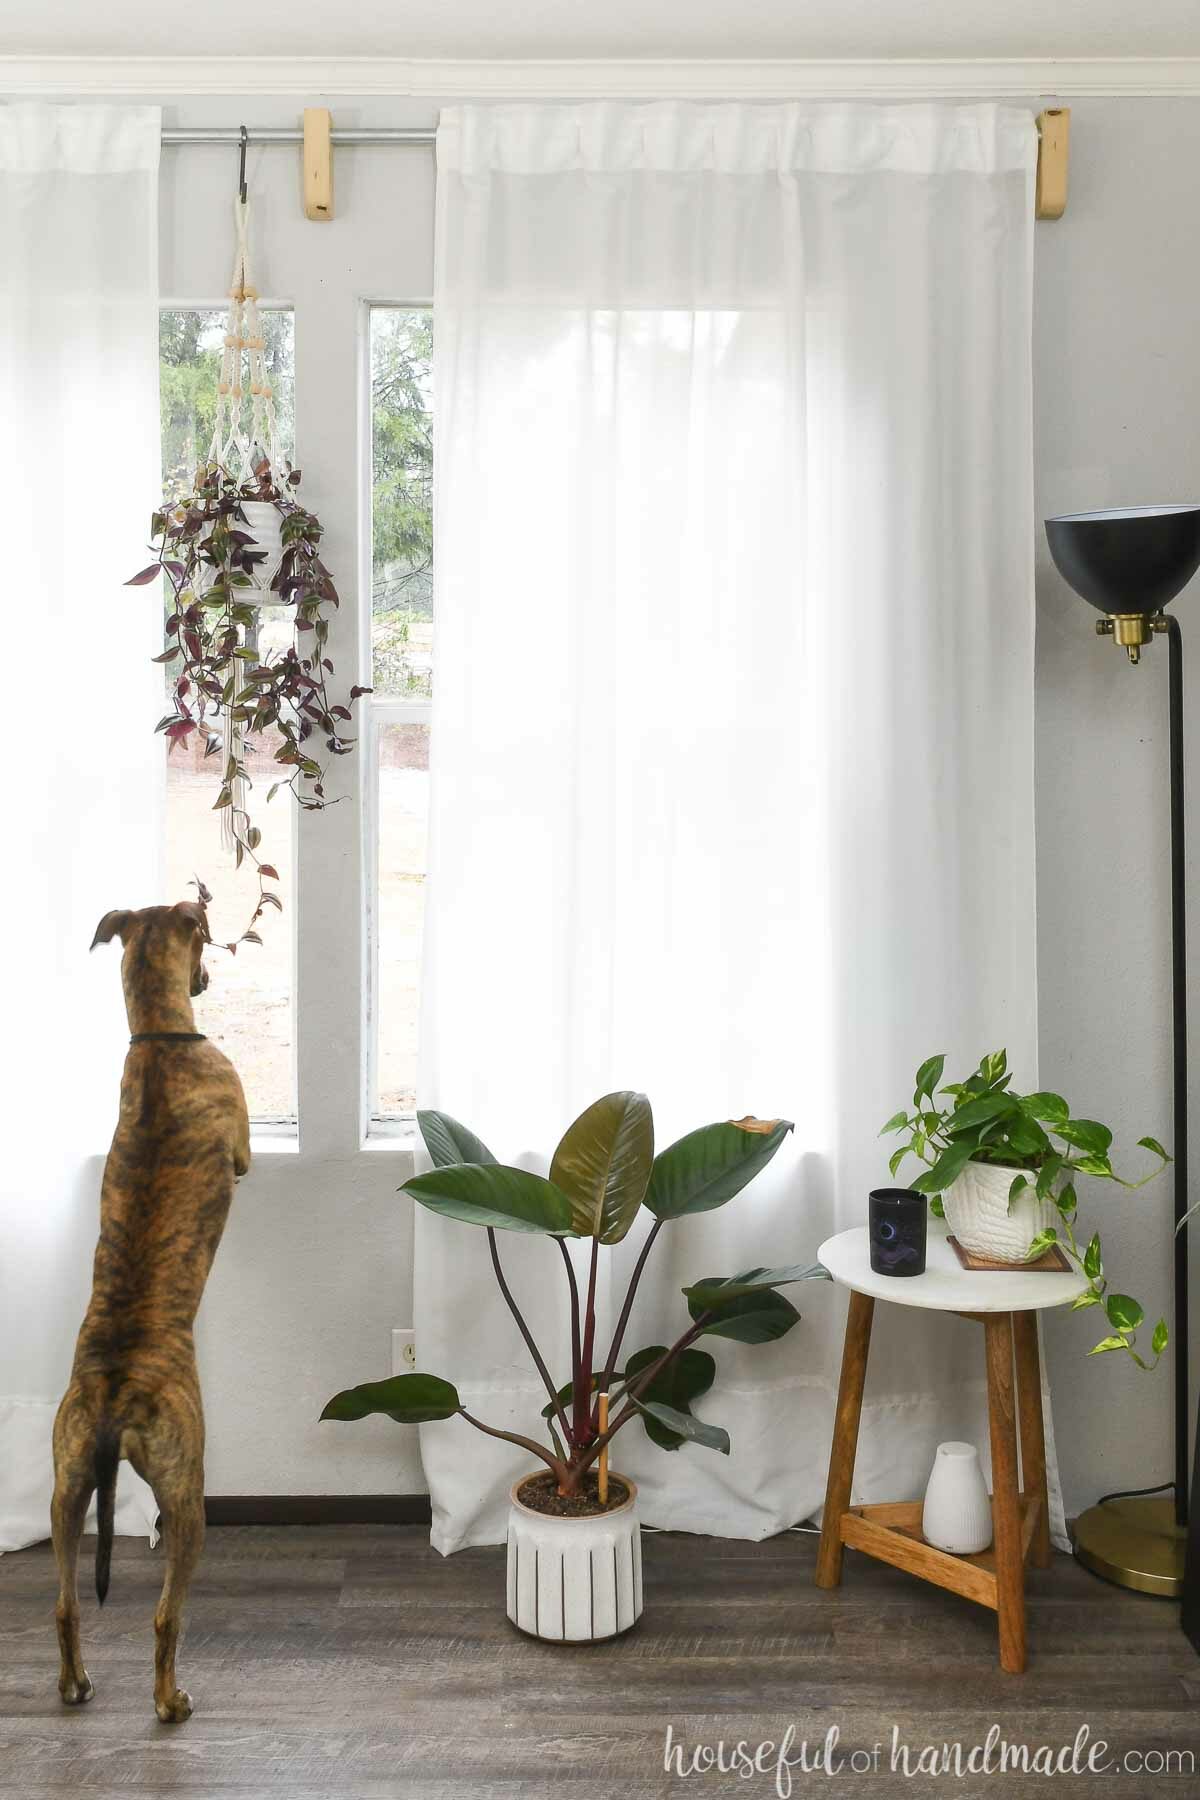 Window with DIY curtain rod brackets holding white curtains with puppy looking out the window and plants around it. 